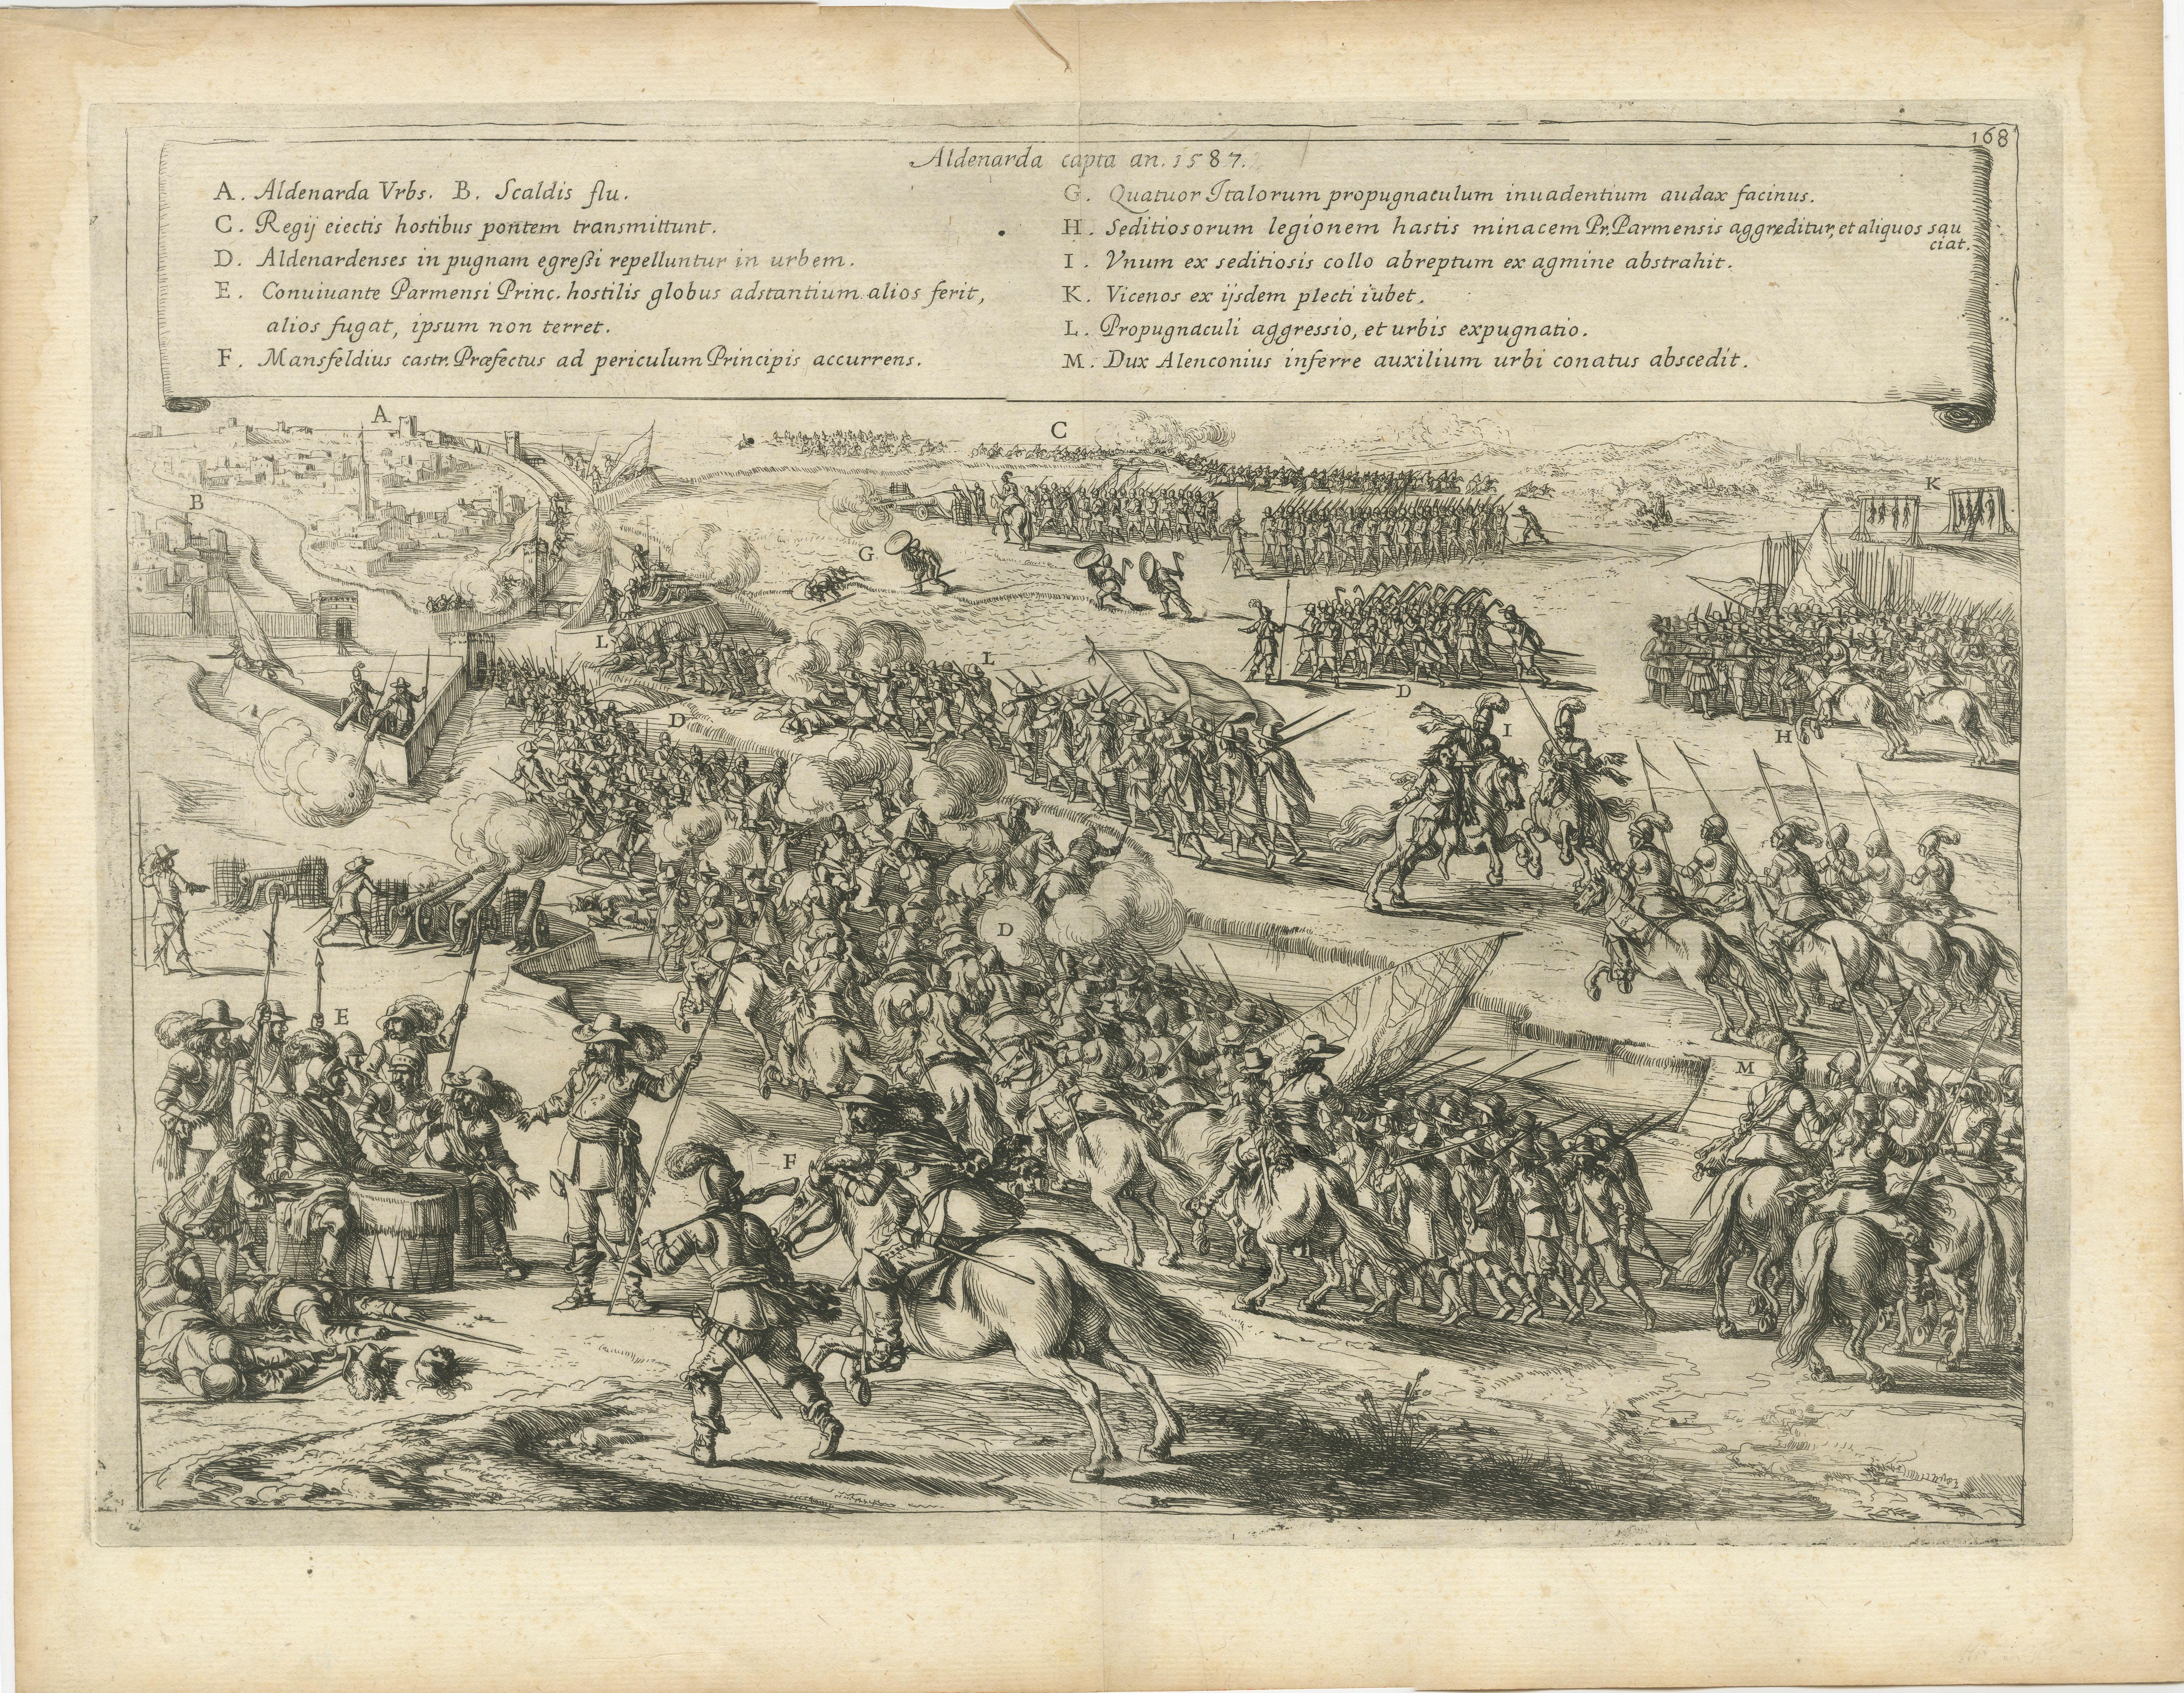 This original rare print depicts the siege and capture of Oudenaarde on July 5, 1582, during the Eighty Years' War. A notable incident during this event was the miraculous escape of the Duke of Parma, Alessandro Farnese, who was unharmed after a